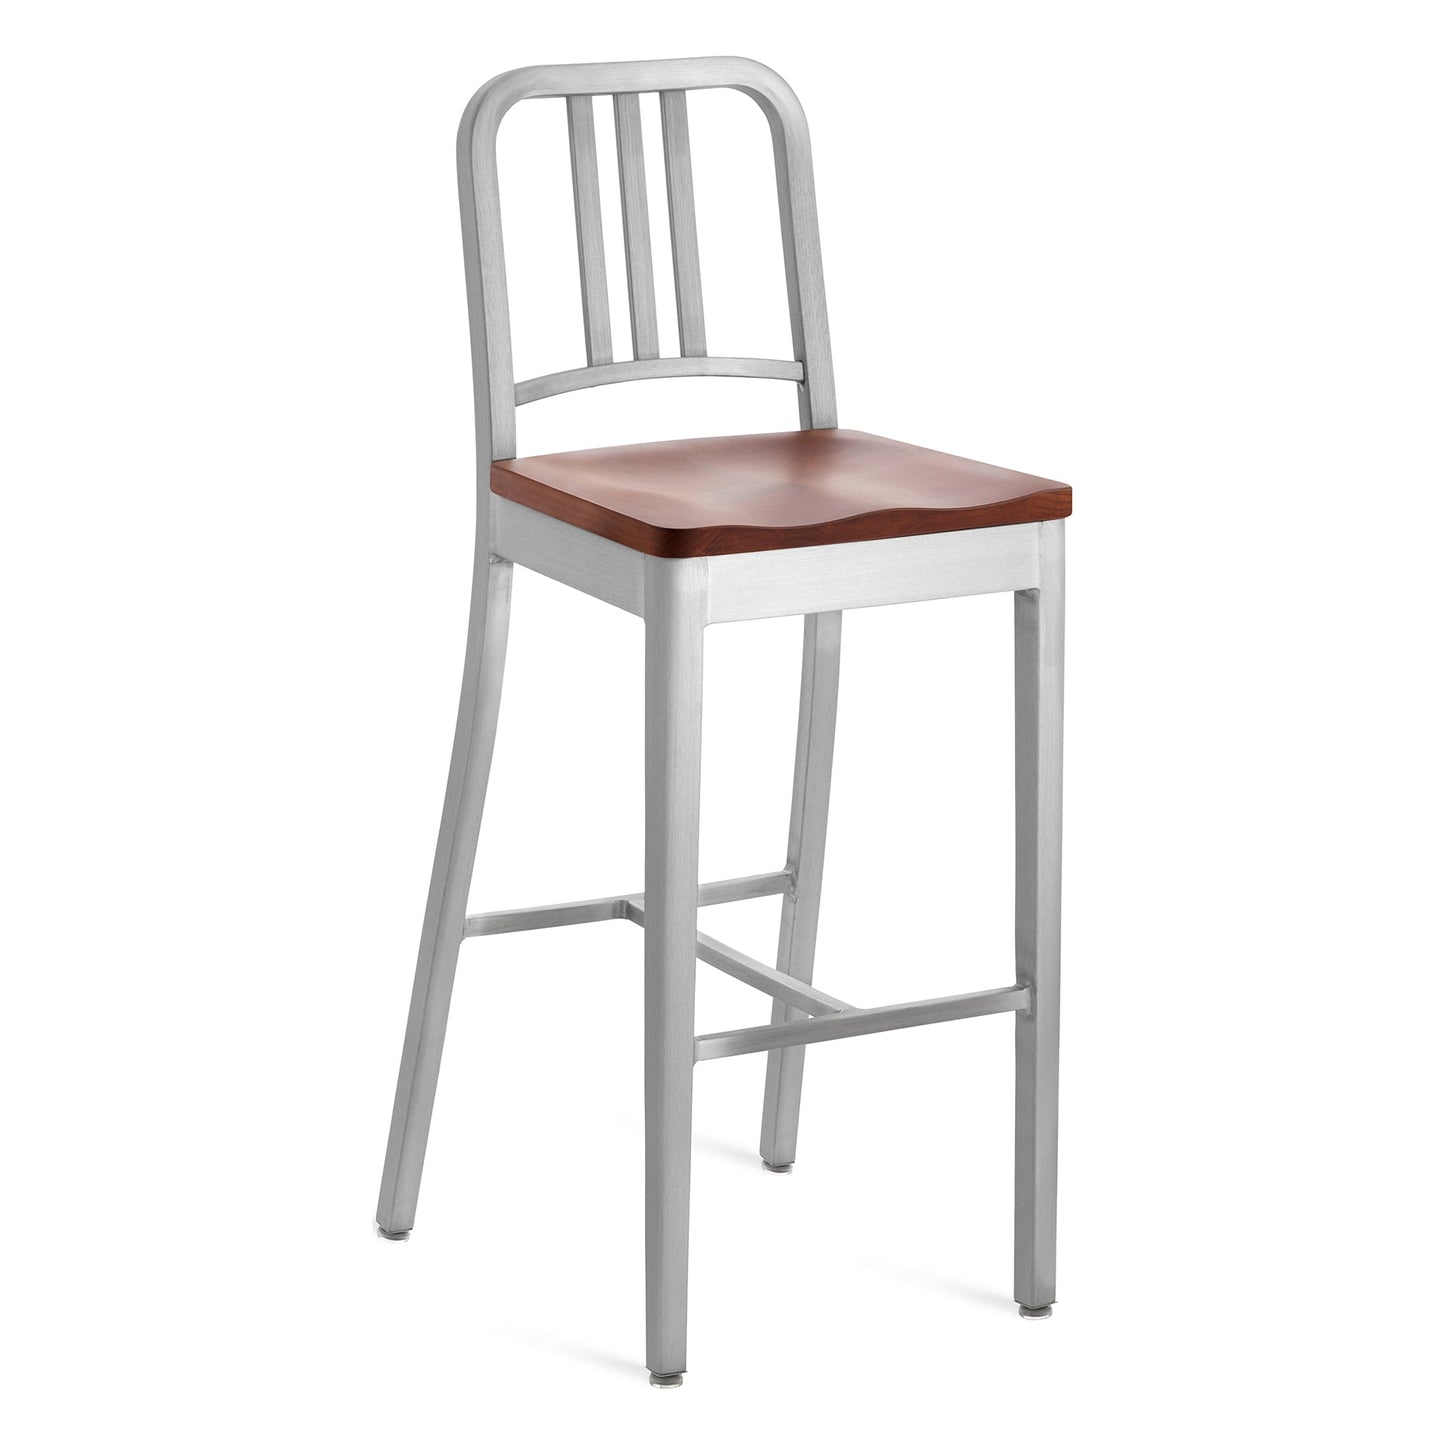 Navy Stool with Wood Seat